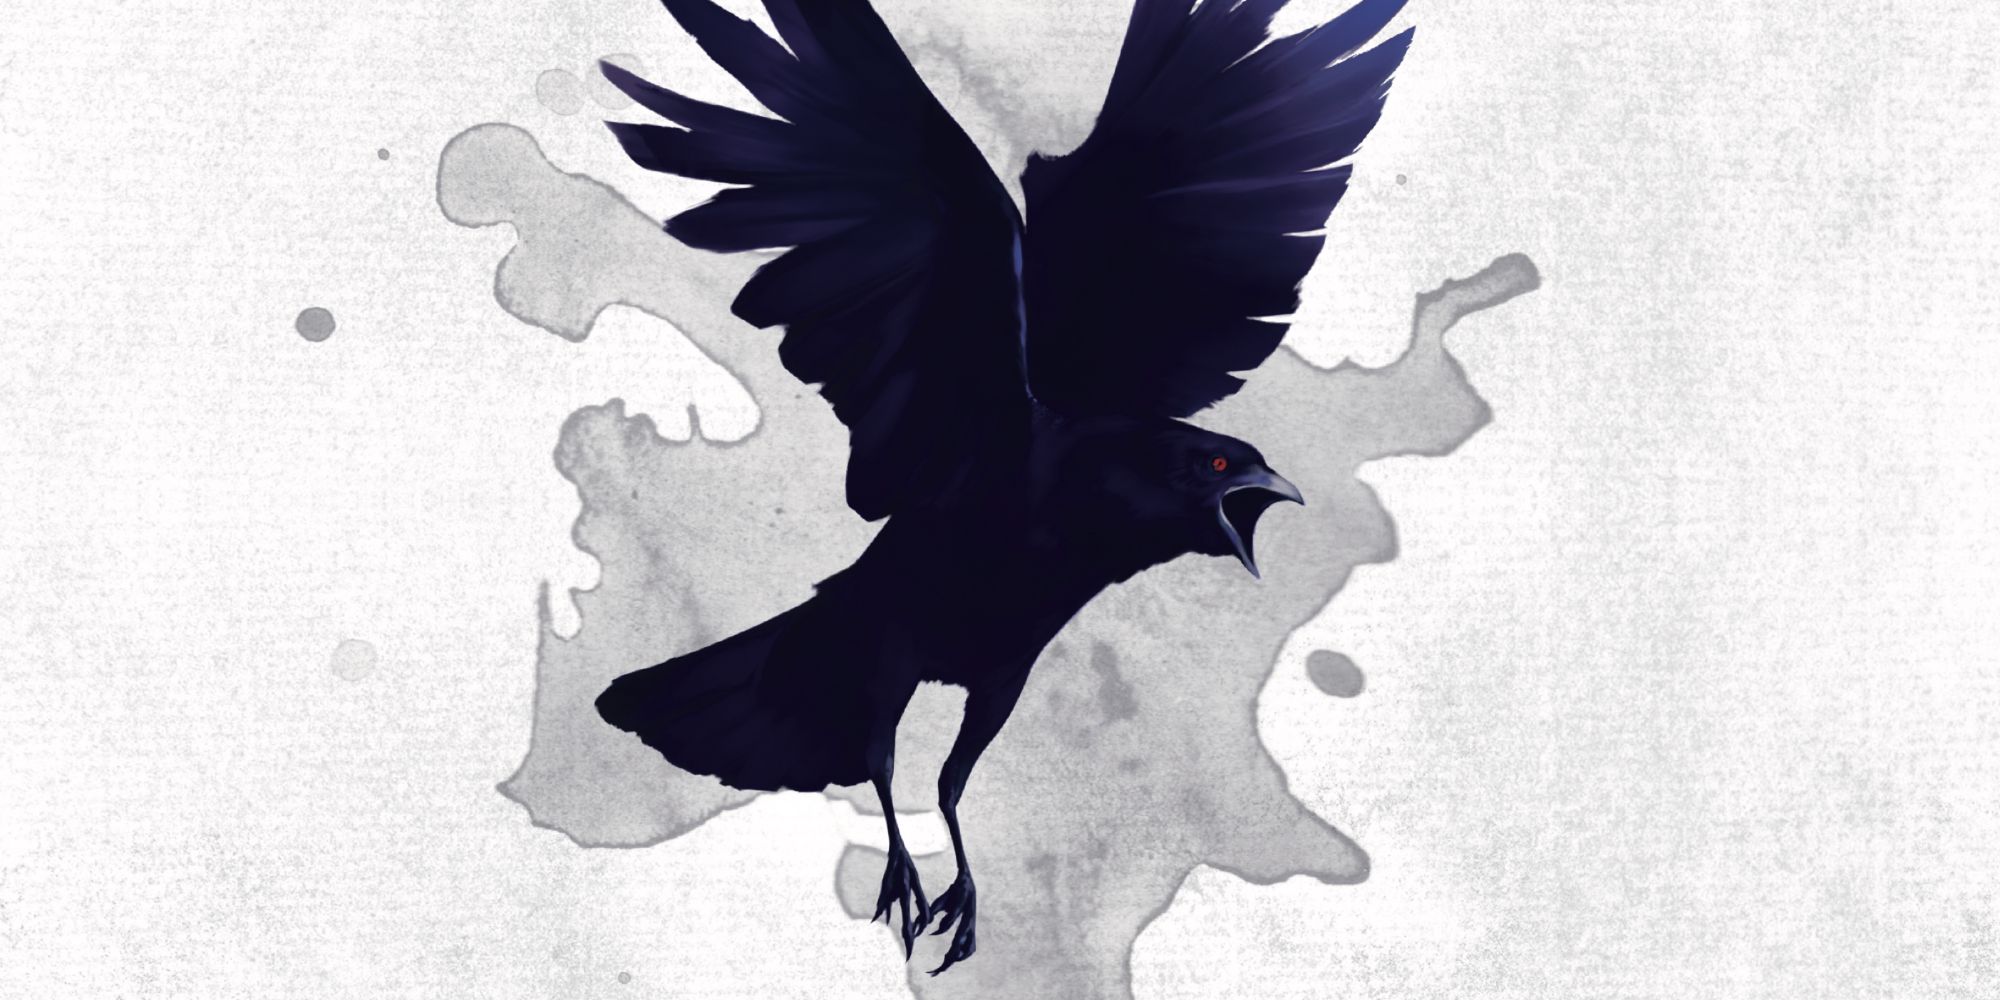 The cover art featuring a raven for the D&D one-shot Death House.